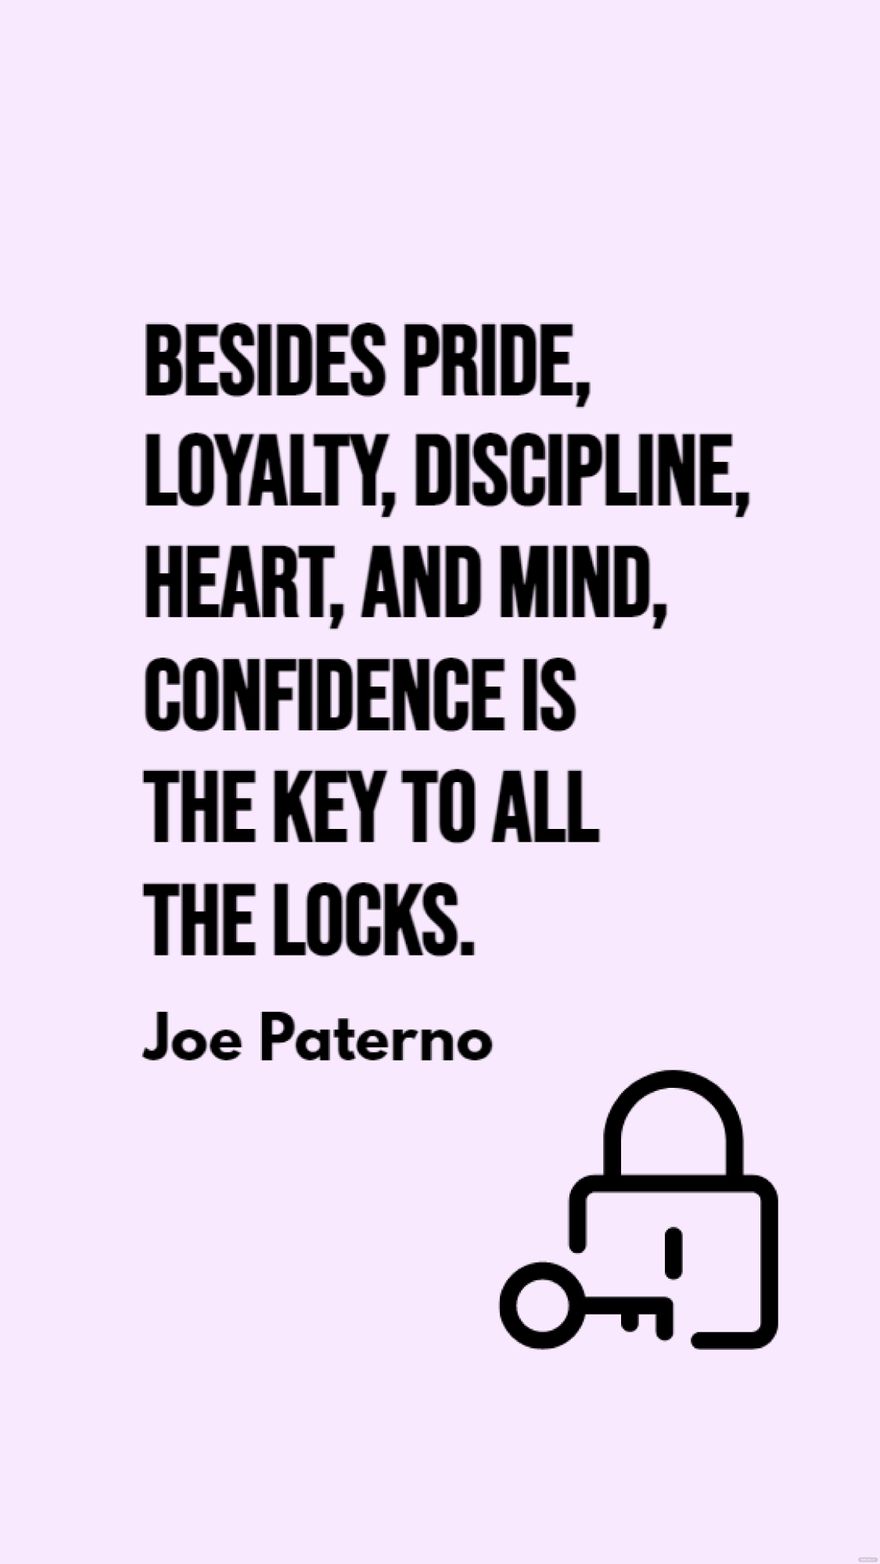 Free Joe Paterno - Besides pride, loyalty, discipline, heart, and mind, confidence is the key to all the locks. in JPG